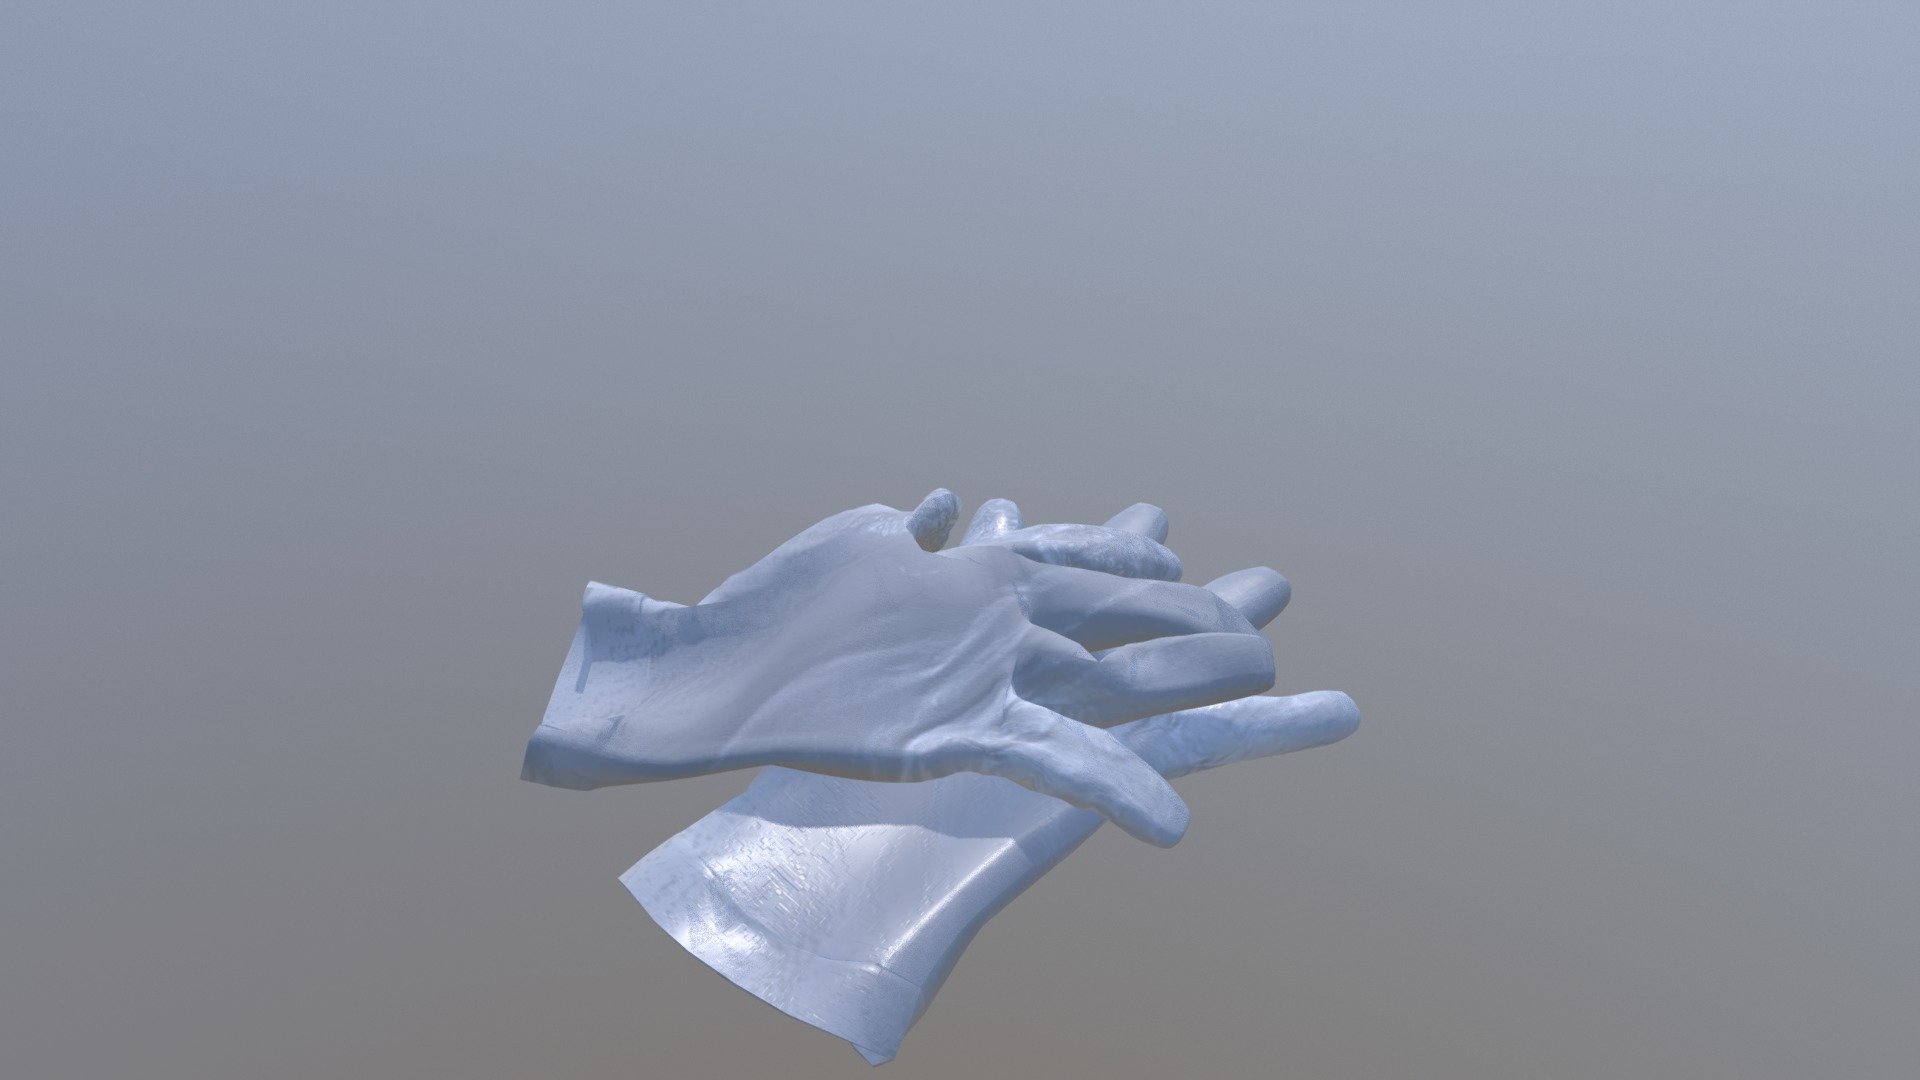 Latex gloves modelled in Autodesk Maya 2018. Used n-cloth to generate falled shape. Textured in Adobe Photoshop 3d model